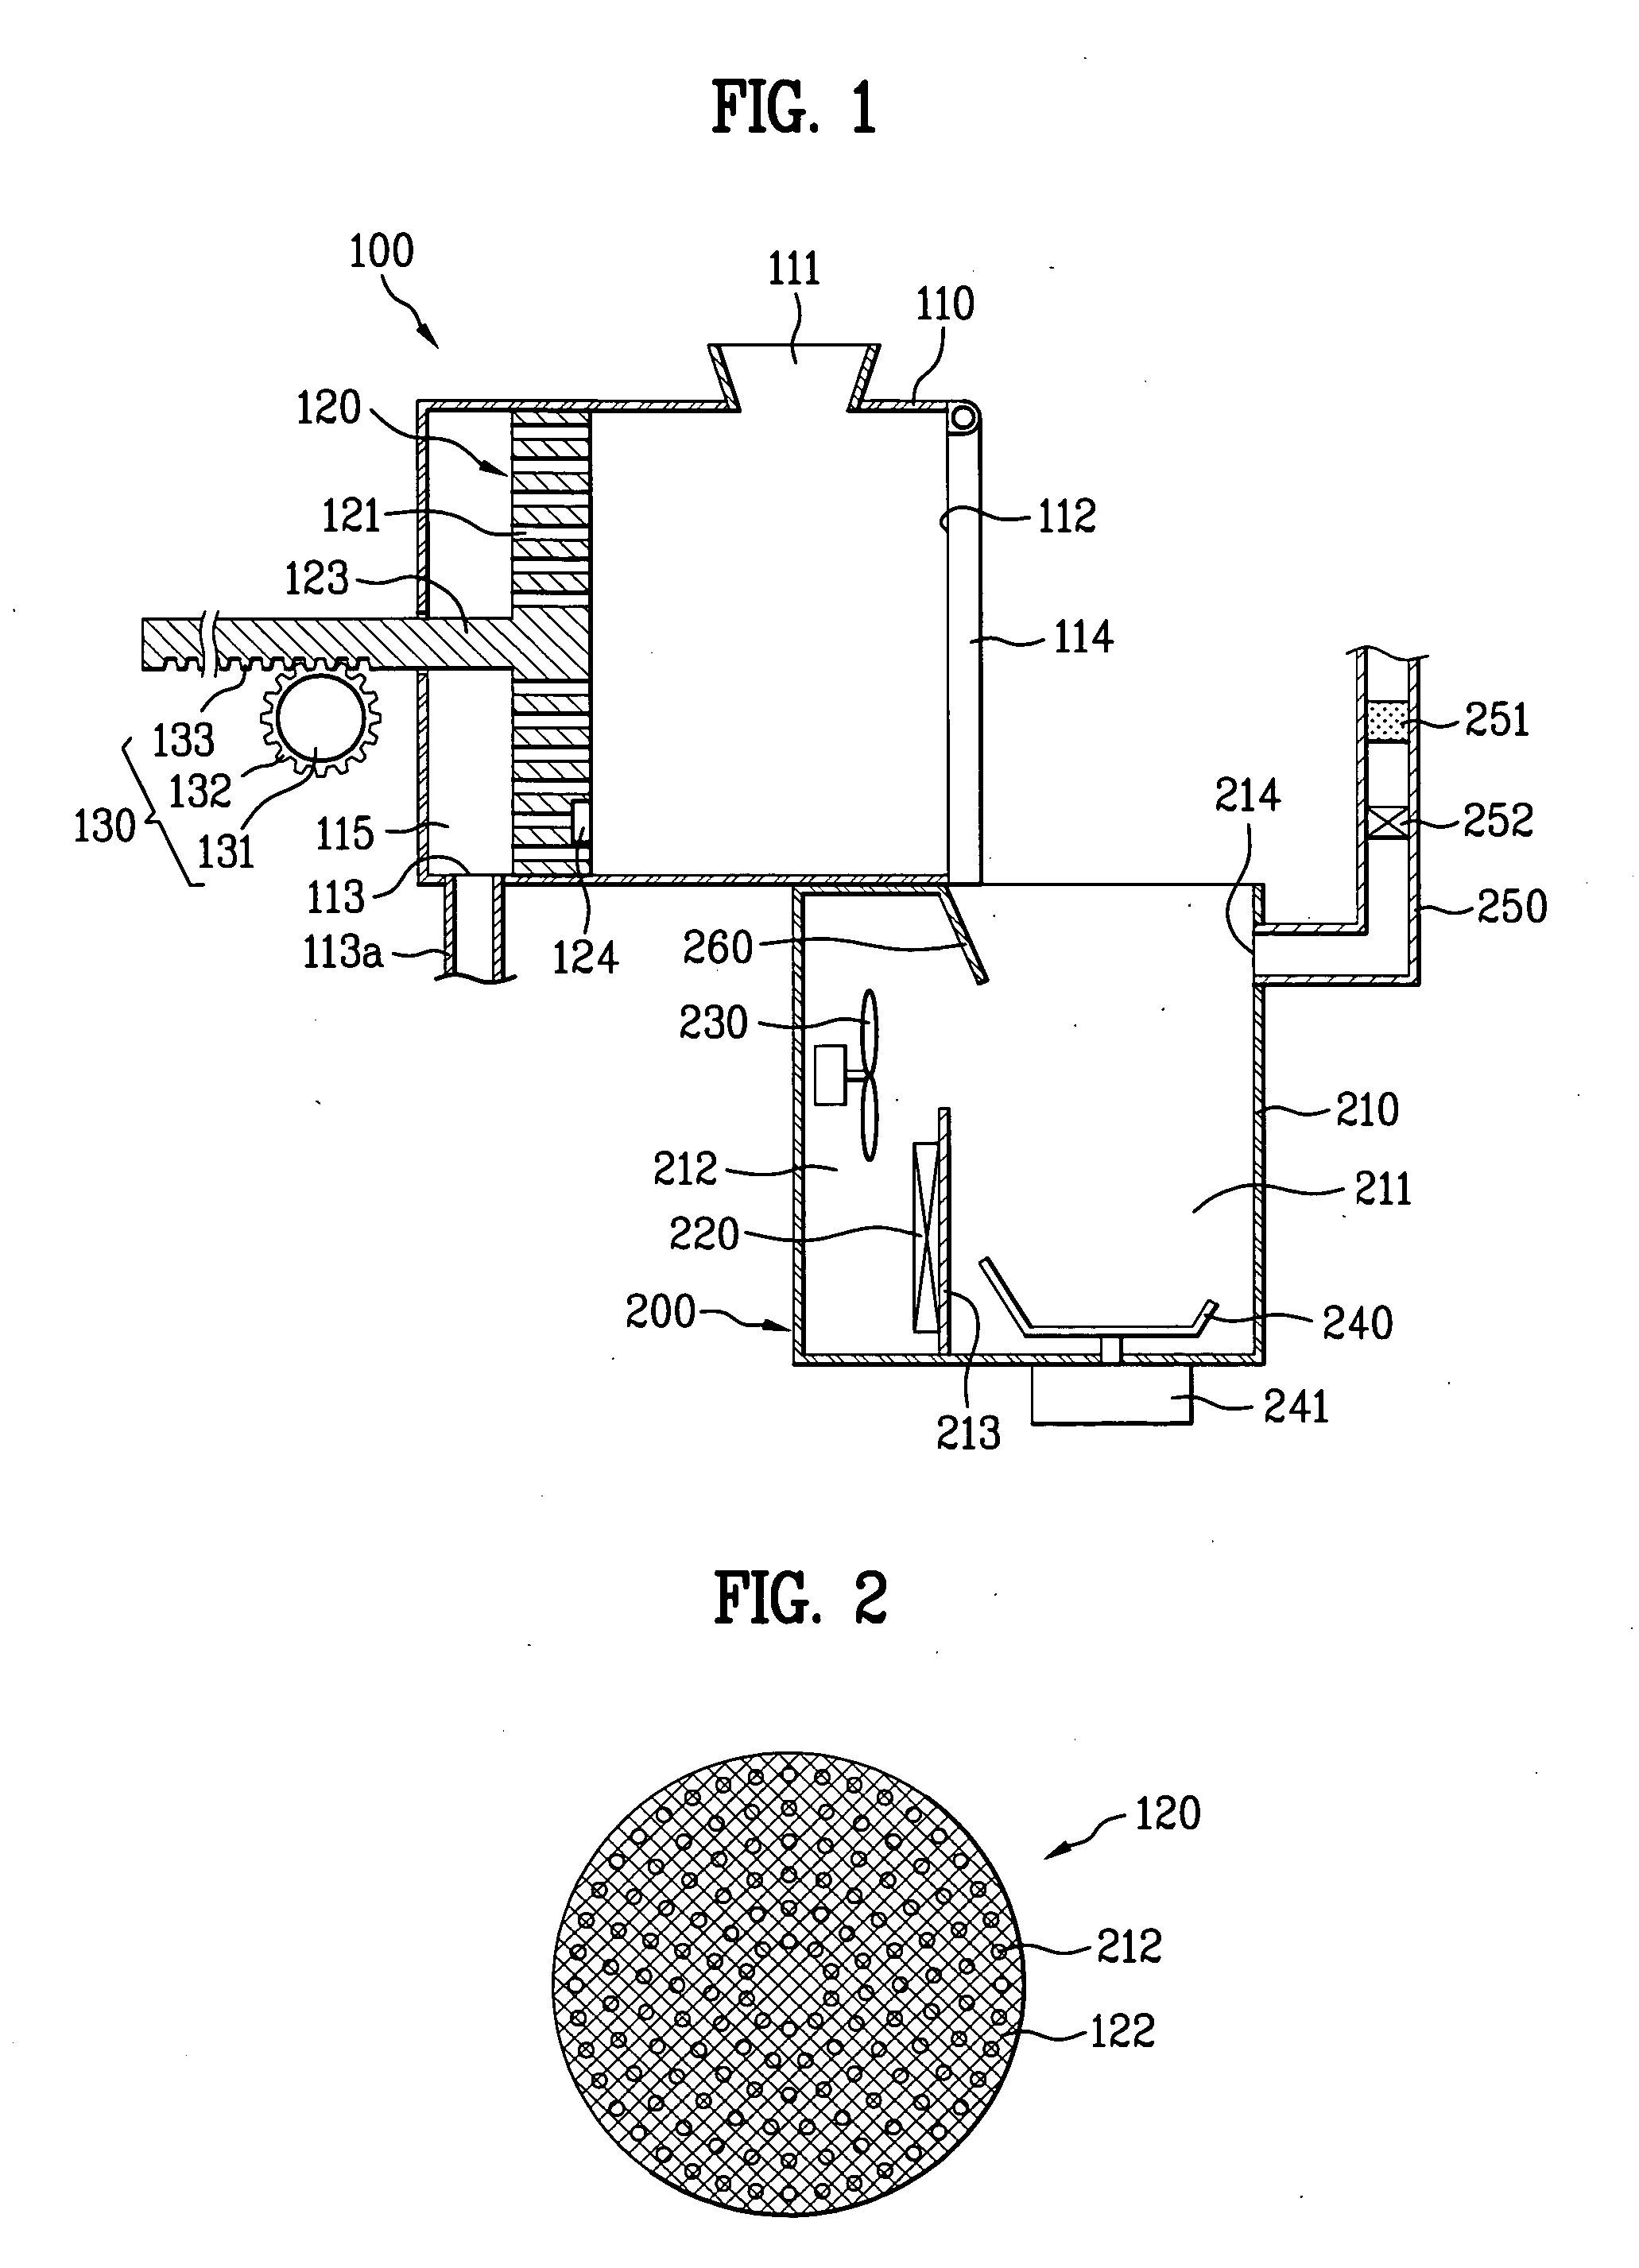 Apparatus for processing oranic substance